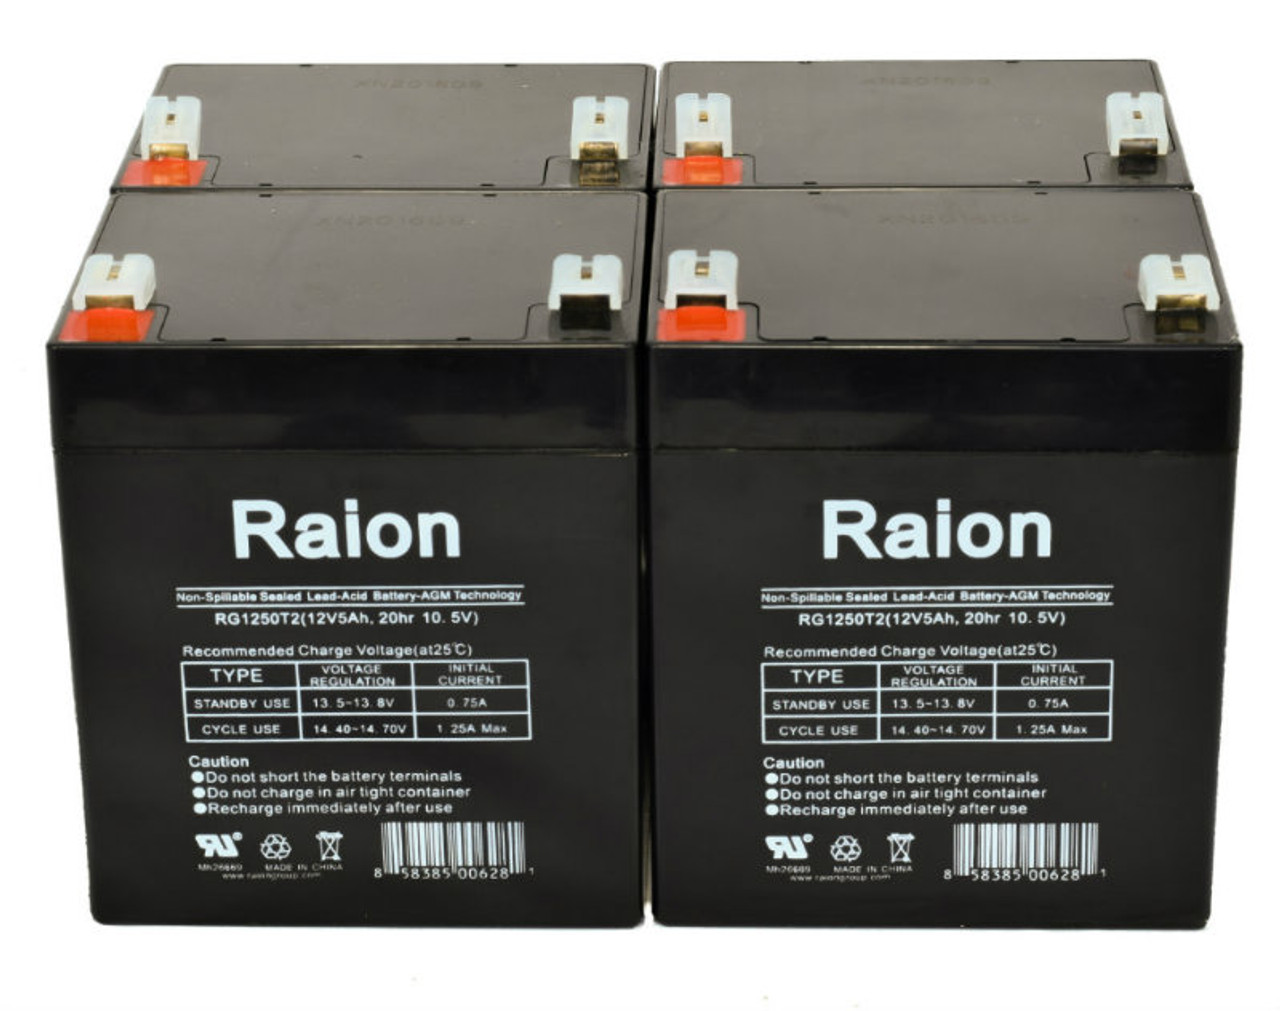 Raion Power 12V 5Ah RG1250T2 Replacement Lead Acid Battery for Fengri 6-FM-4.5 - 4 Pack